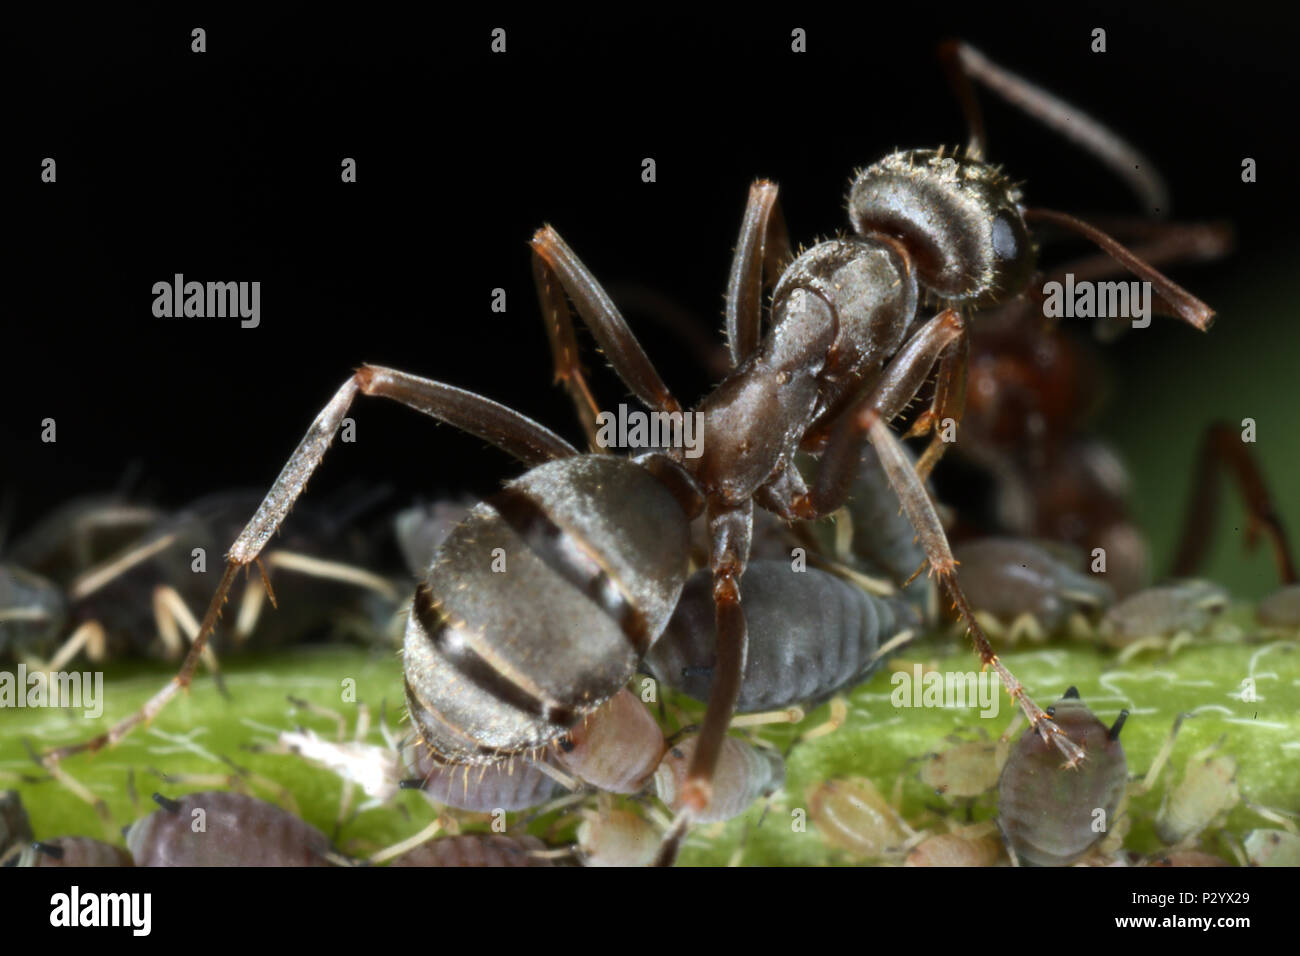 Berlin, Germany, Ant and leaf leeuse on a plant stalk Stock Photo